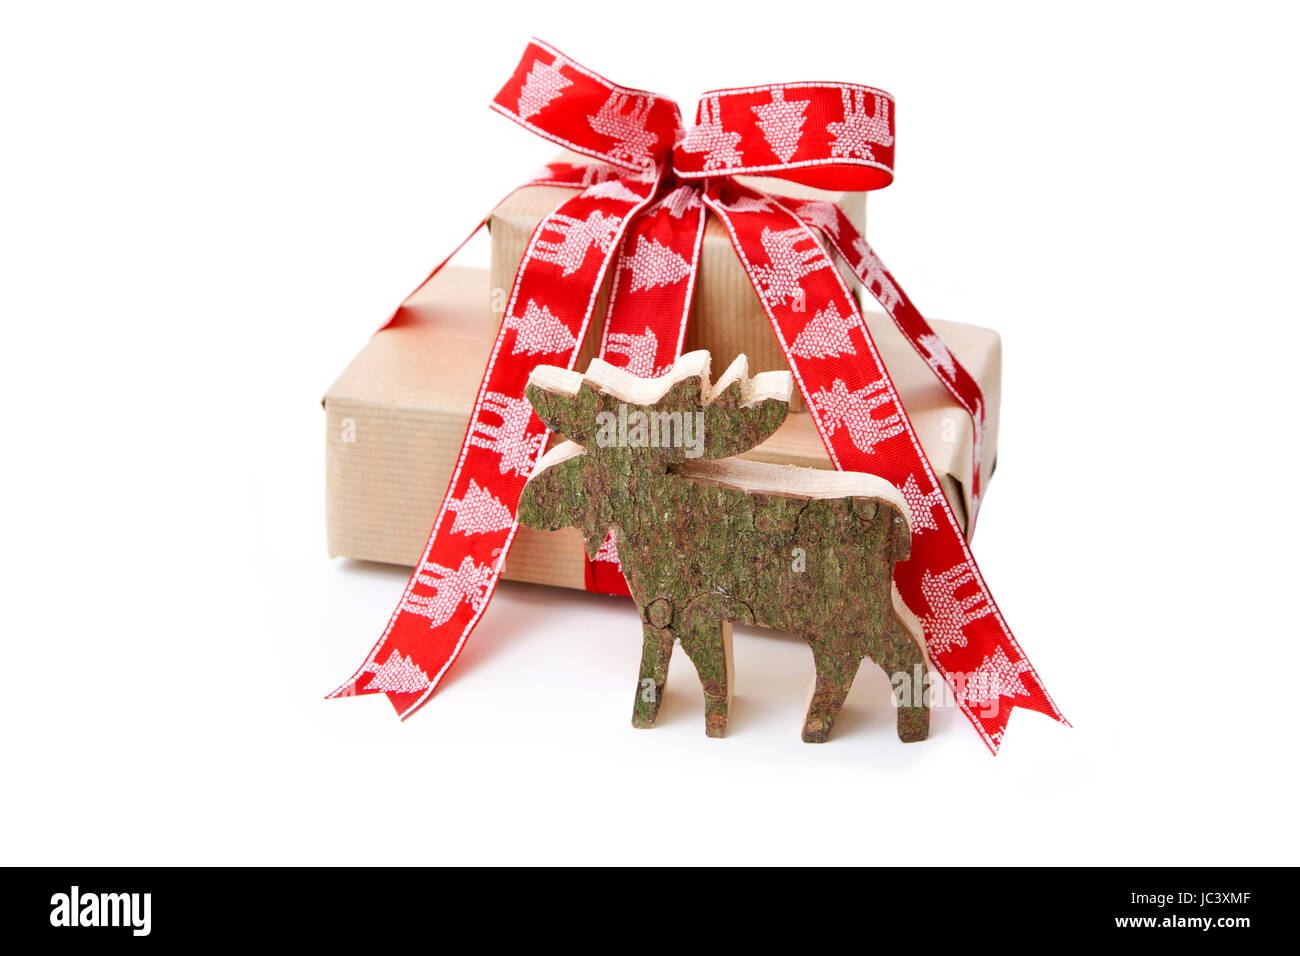 Christmas present in red with a wooden handmade elk or reindeer for decoration Stock Photo